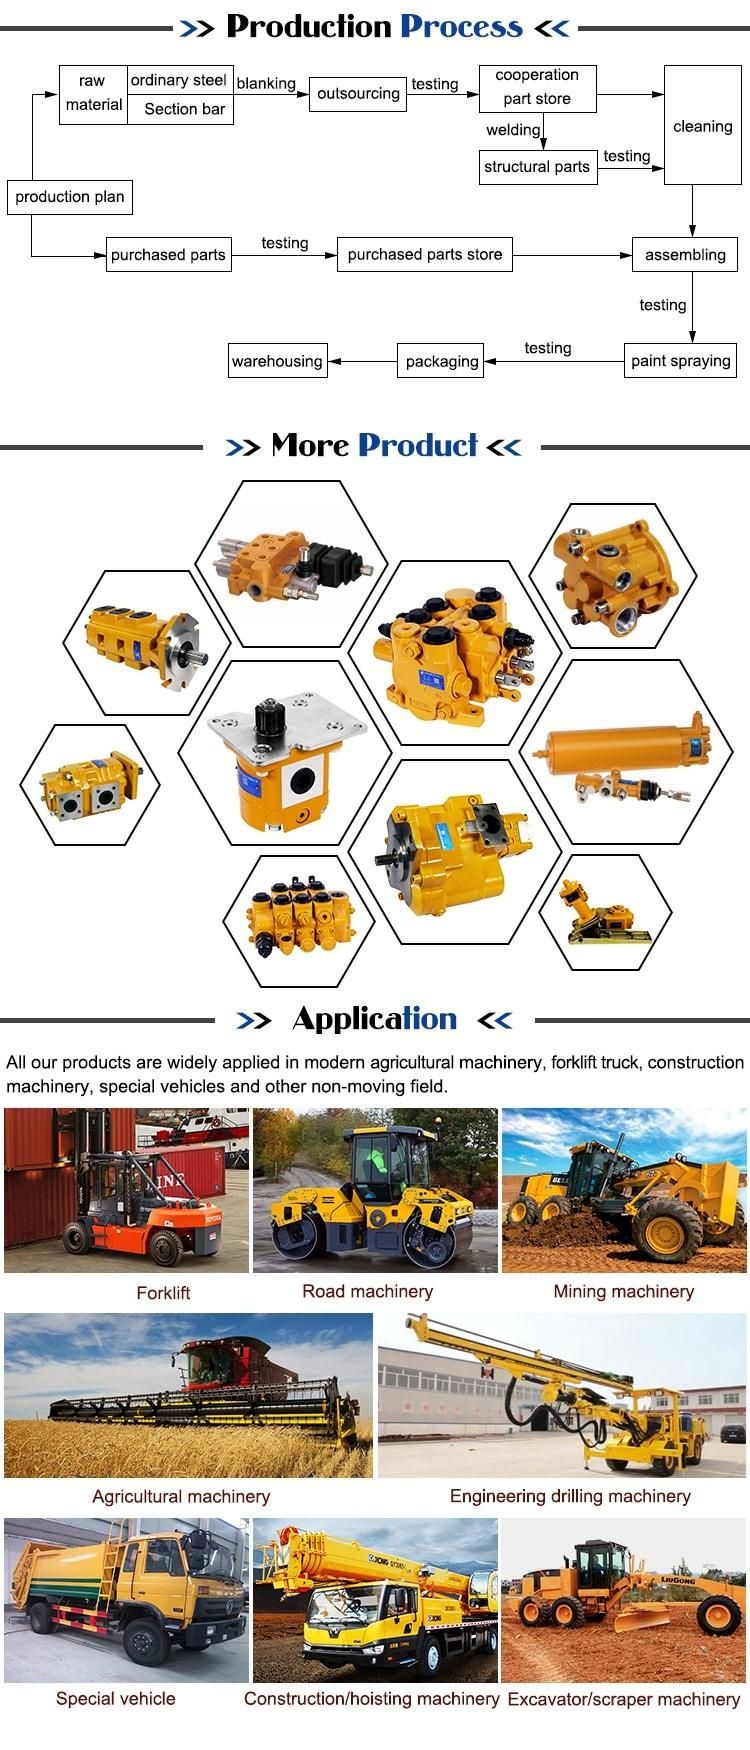 Good Quality Hydraulic Cylinder for Agricultural Machinery